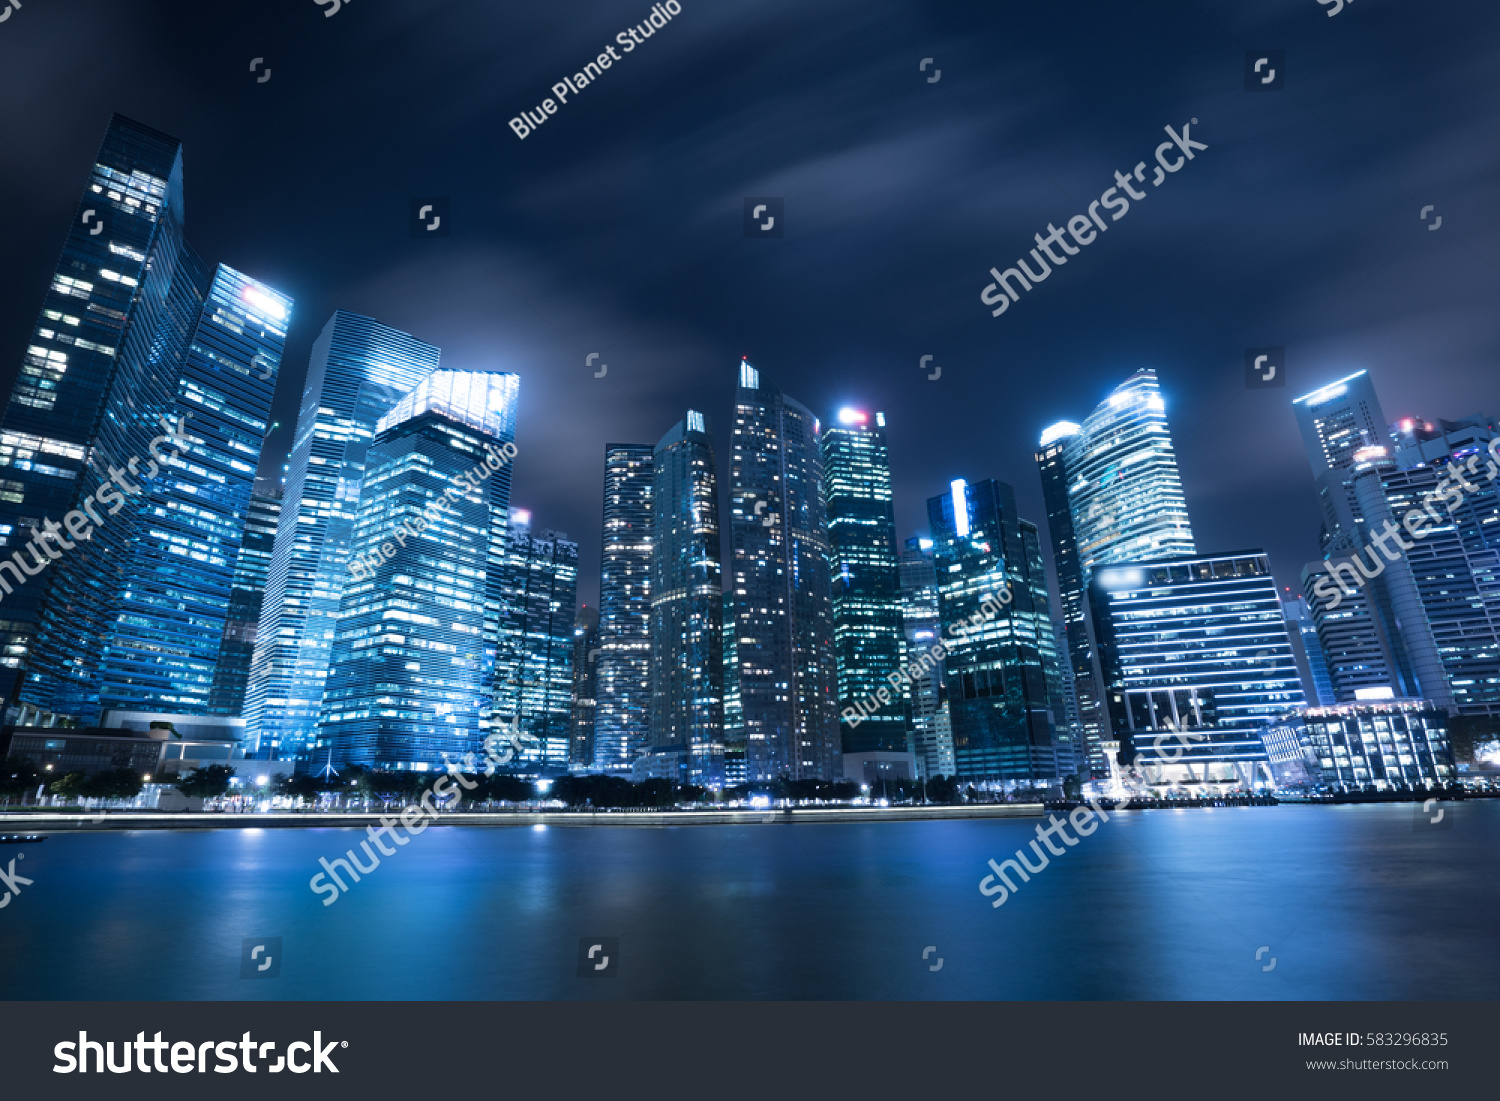 Modern architecture, office building cityscape background. #583296835